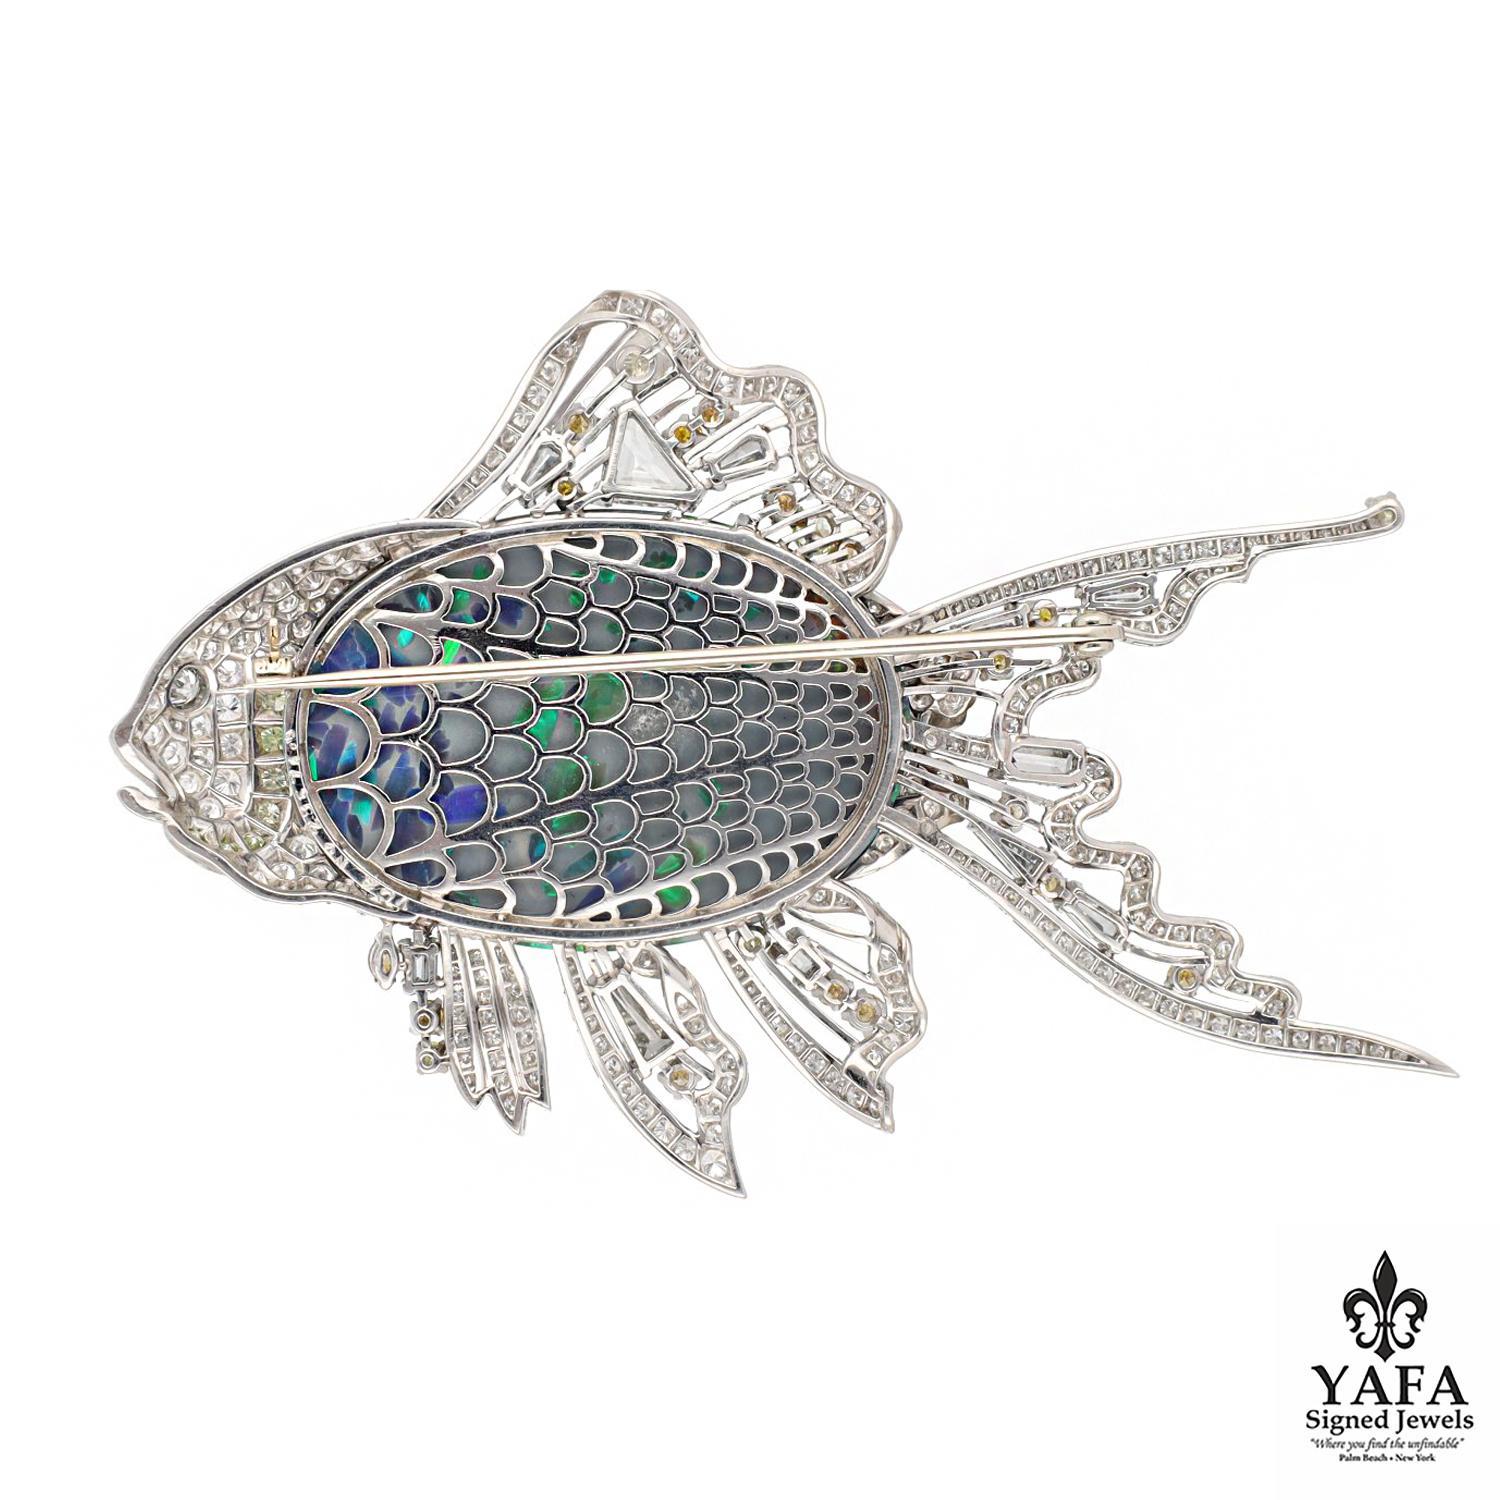 A Masterstroke of Creativity with an Explosion of Color, this Van Cleef & Arpels Brooch Expresses its Design Through a Vibrant Oval Shaped Black Opal Reminiscent of the Caribbean Sea, Further Enhanced with White and Fancy Colored Diamonds in Various